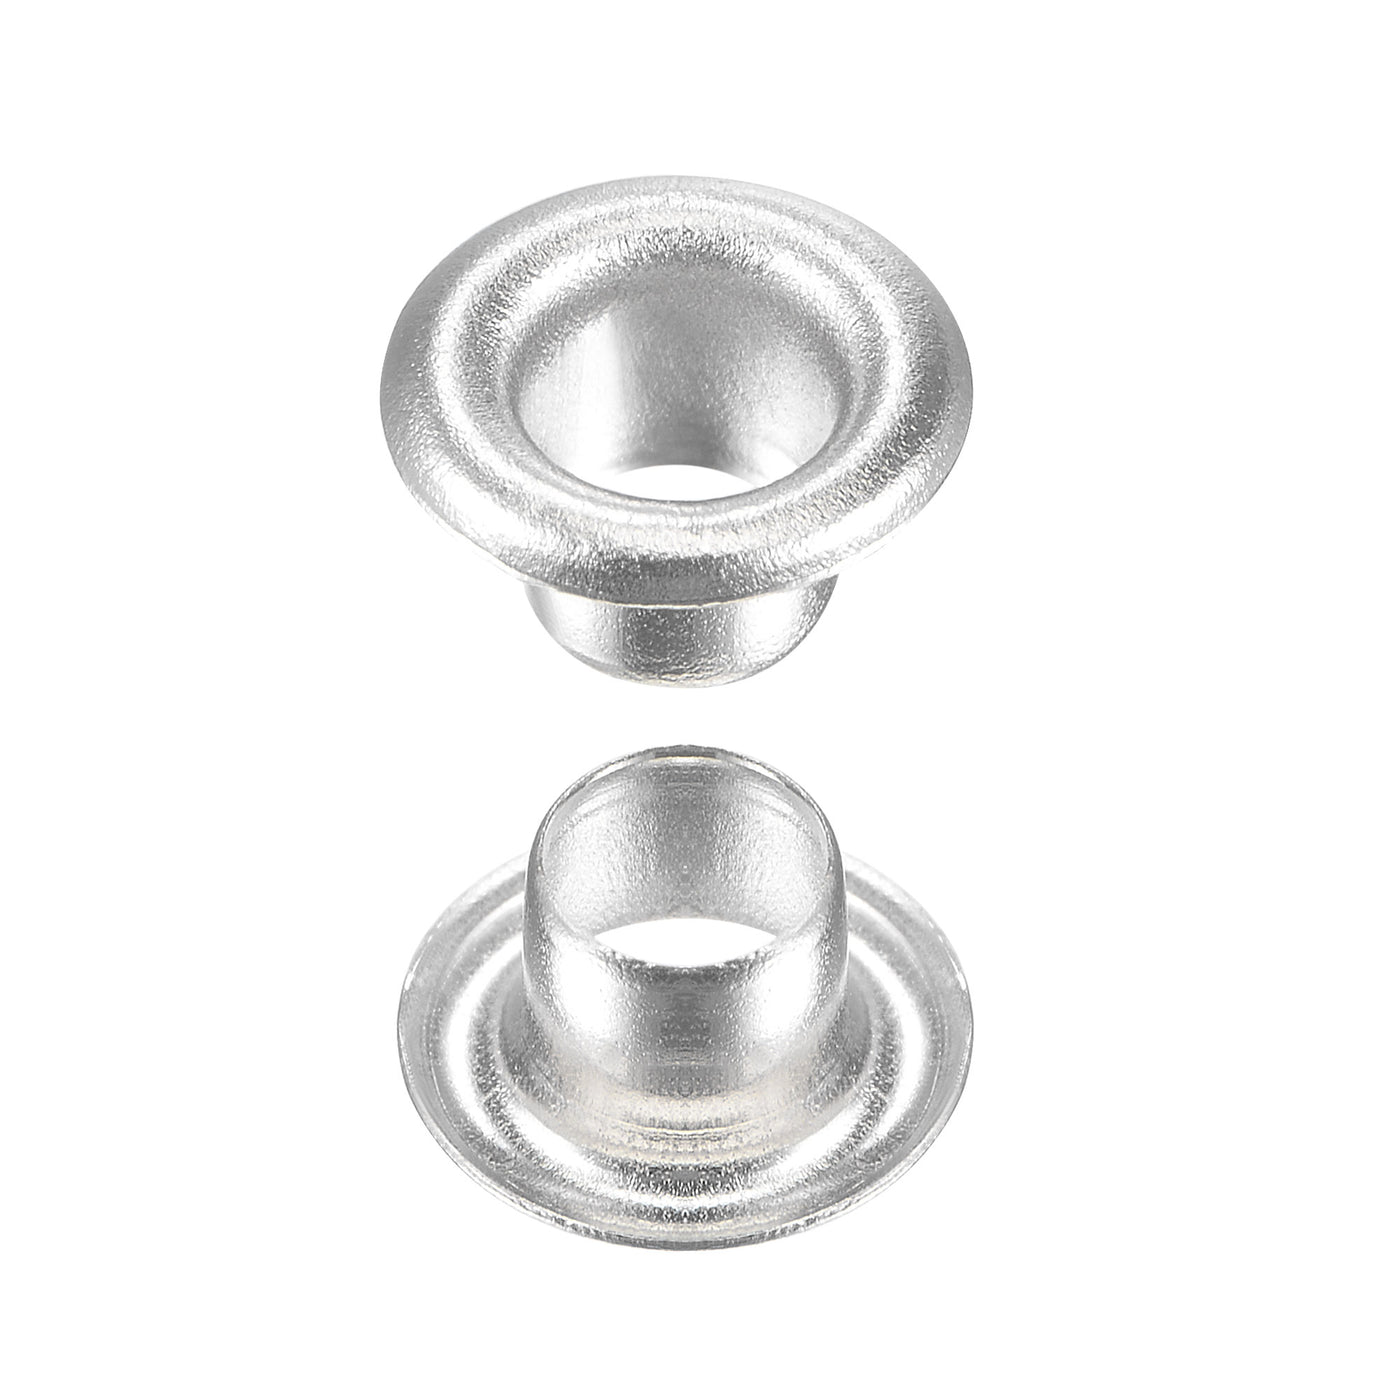 uxcell Uxcell Eyelet with Washer 7x3.5x4mm Copper Grommet Silver Tone 100 Set